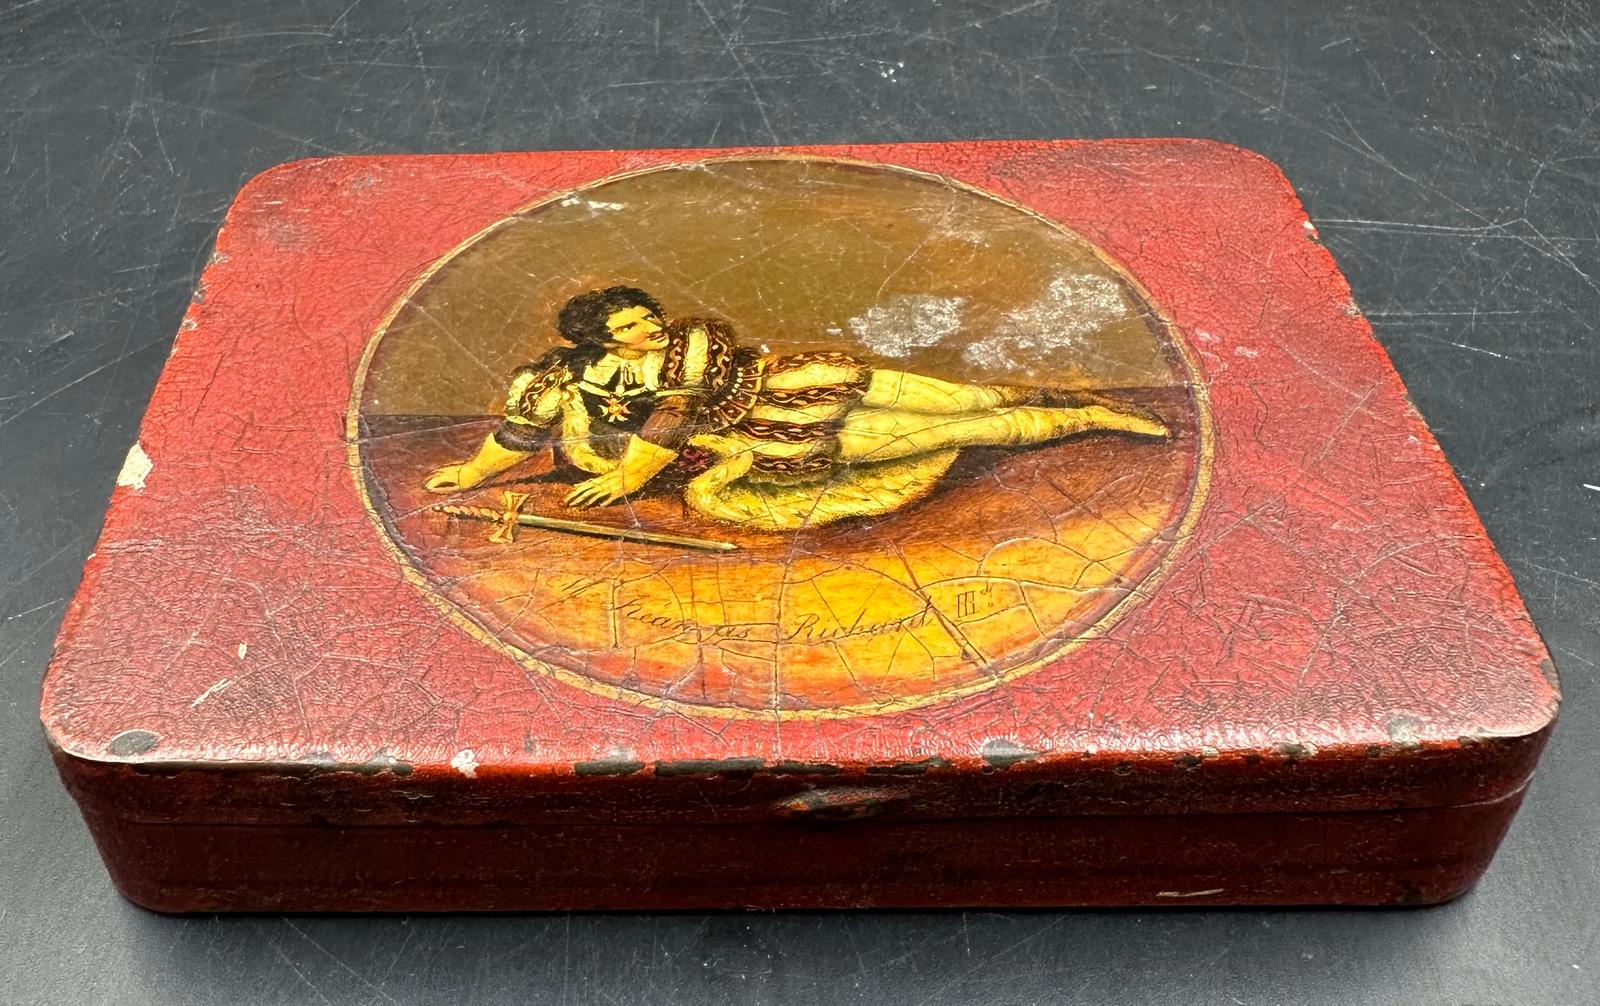 A vintage trinket tin painted with and image of Edmund Keane as Richards III